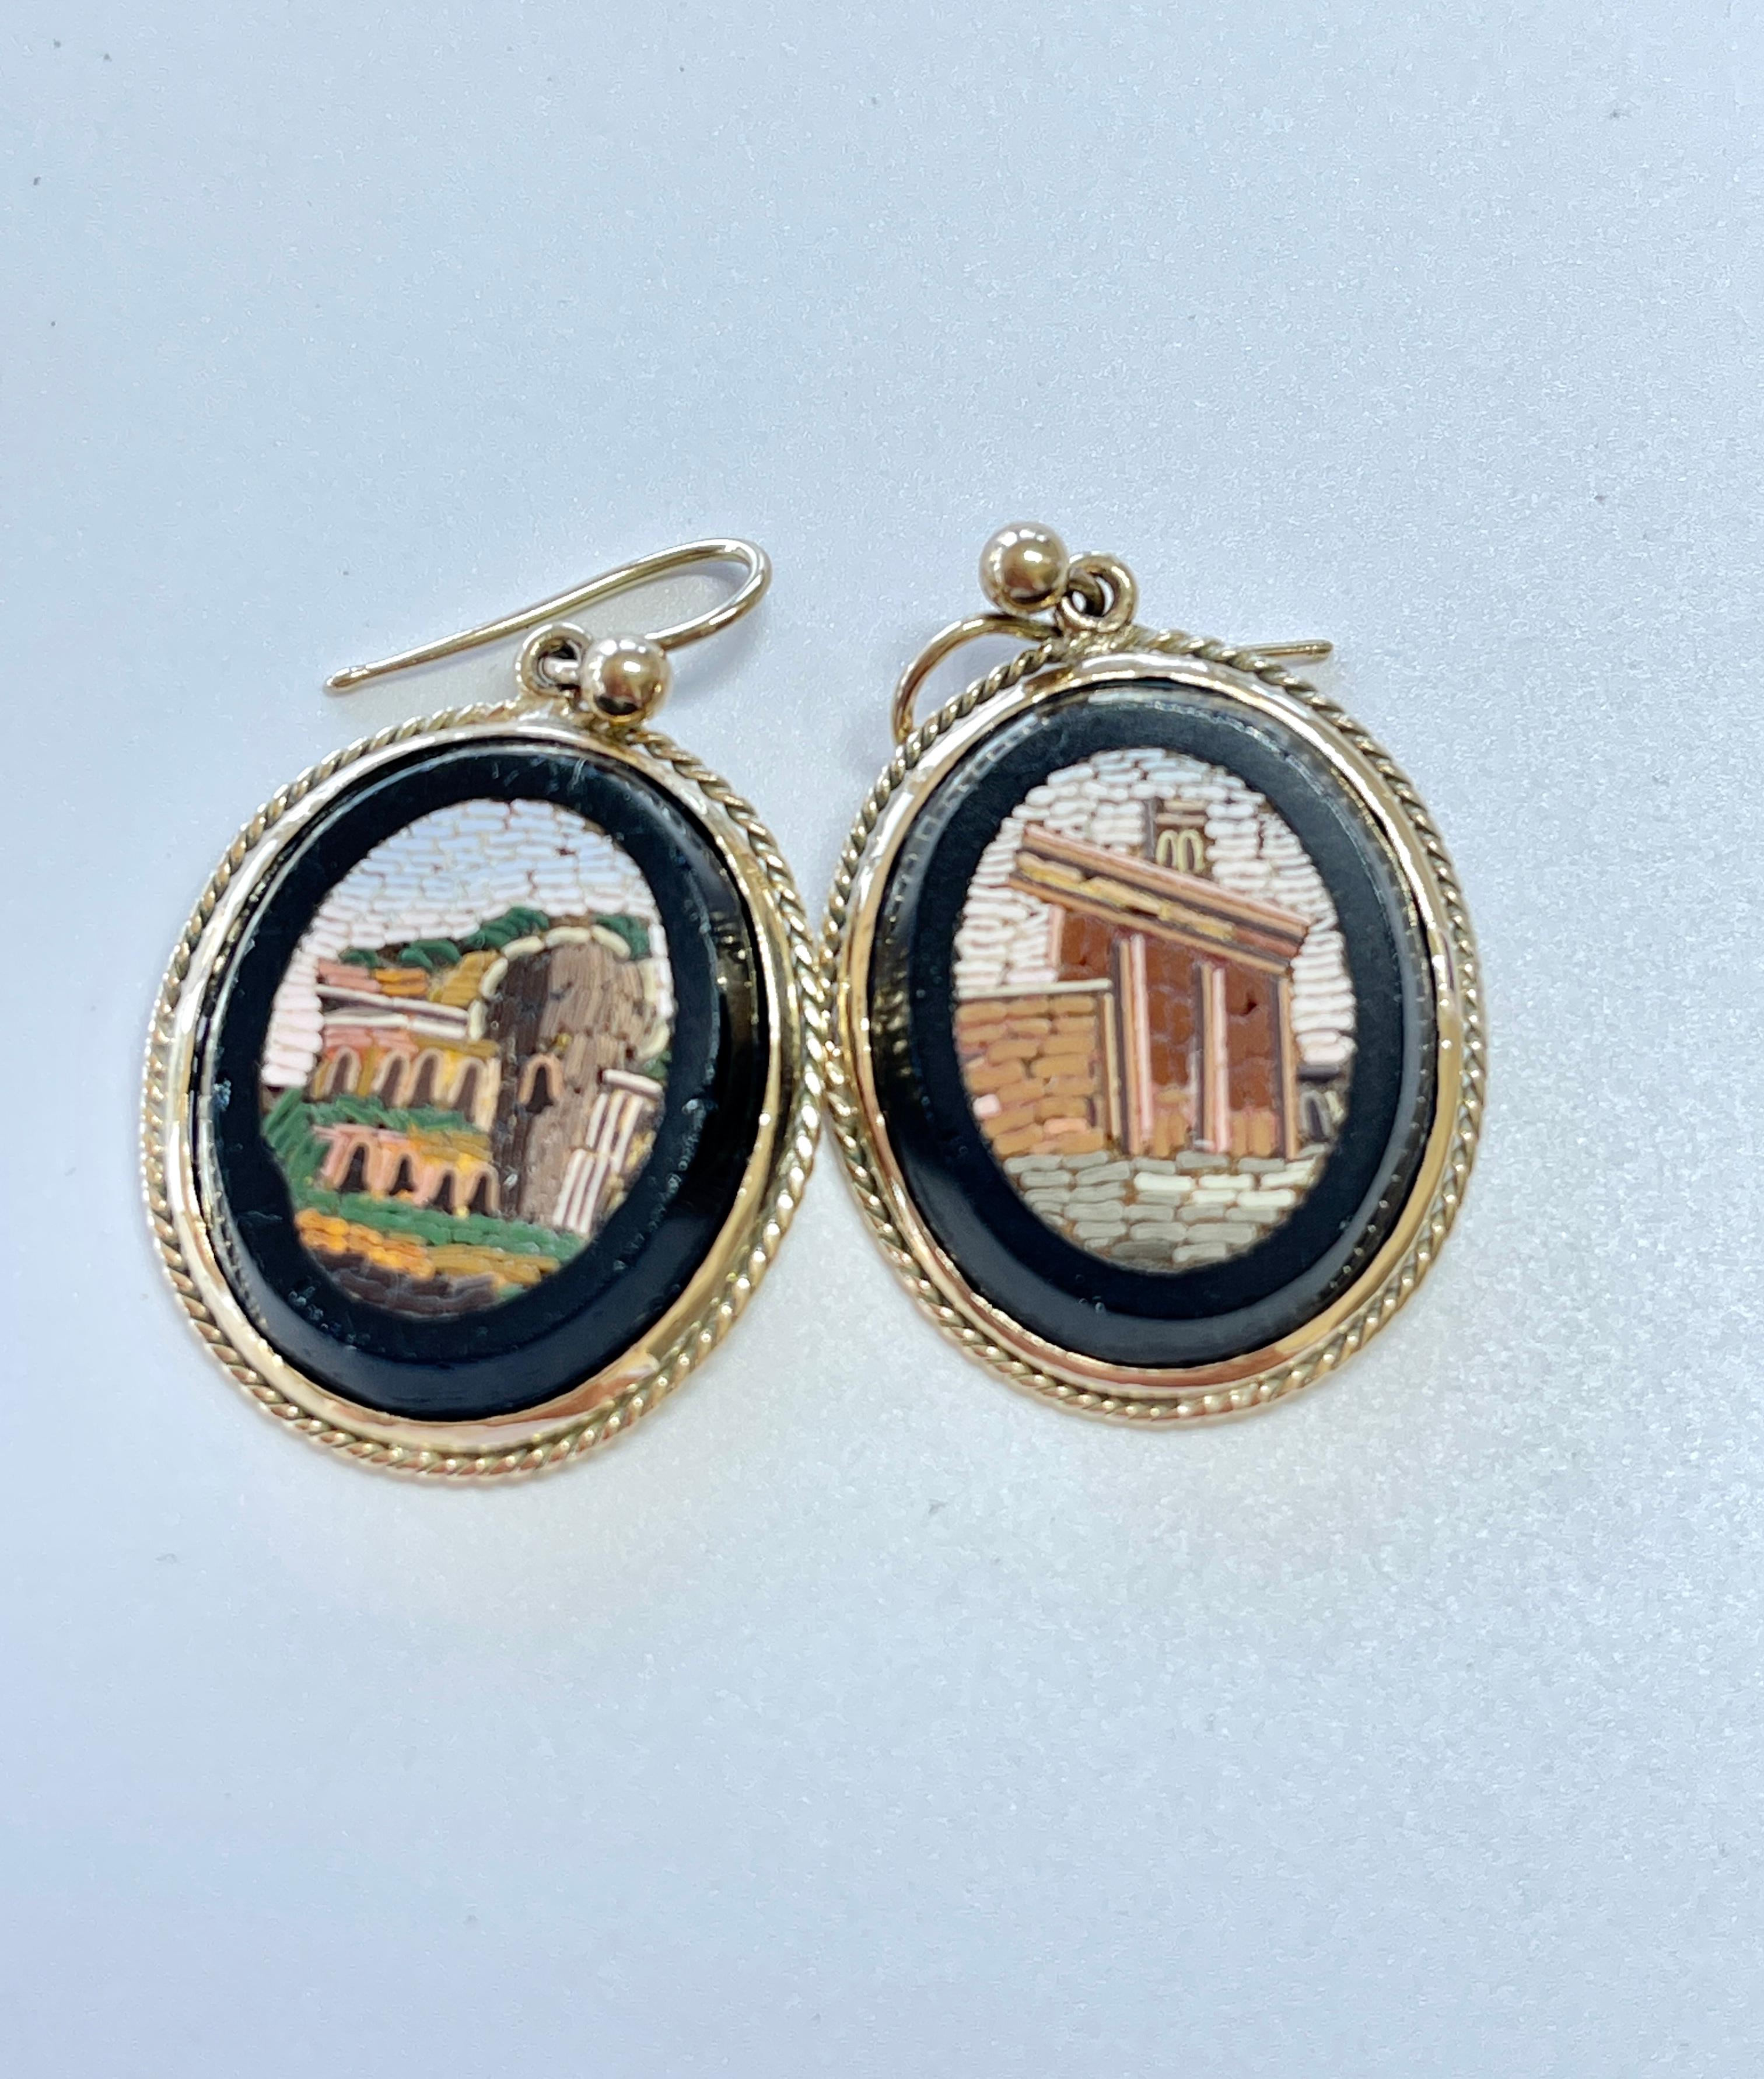 We are thrilled to offer you some high quality, Micro Mosaic pieces!
These stunning earrings feature scenes of Roman ruins created by micro pieces of coloured glass.  Each piece is meticulously cut and then hand inlayed into black glass.  This is